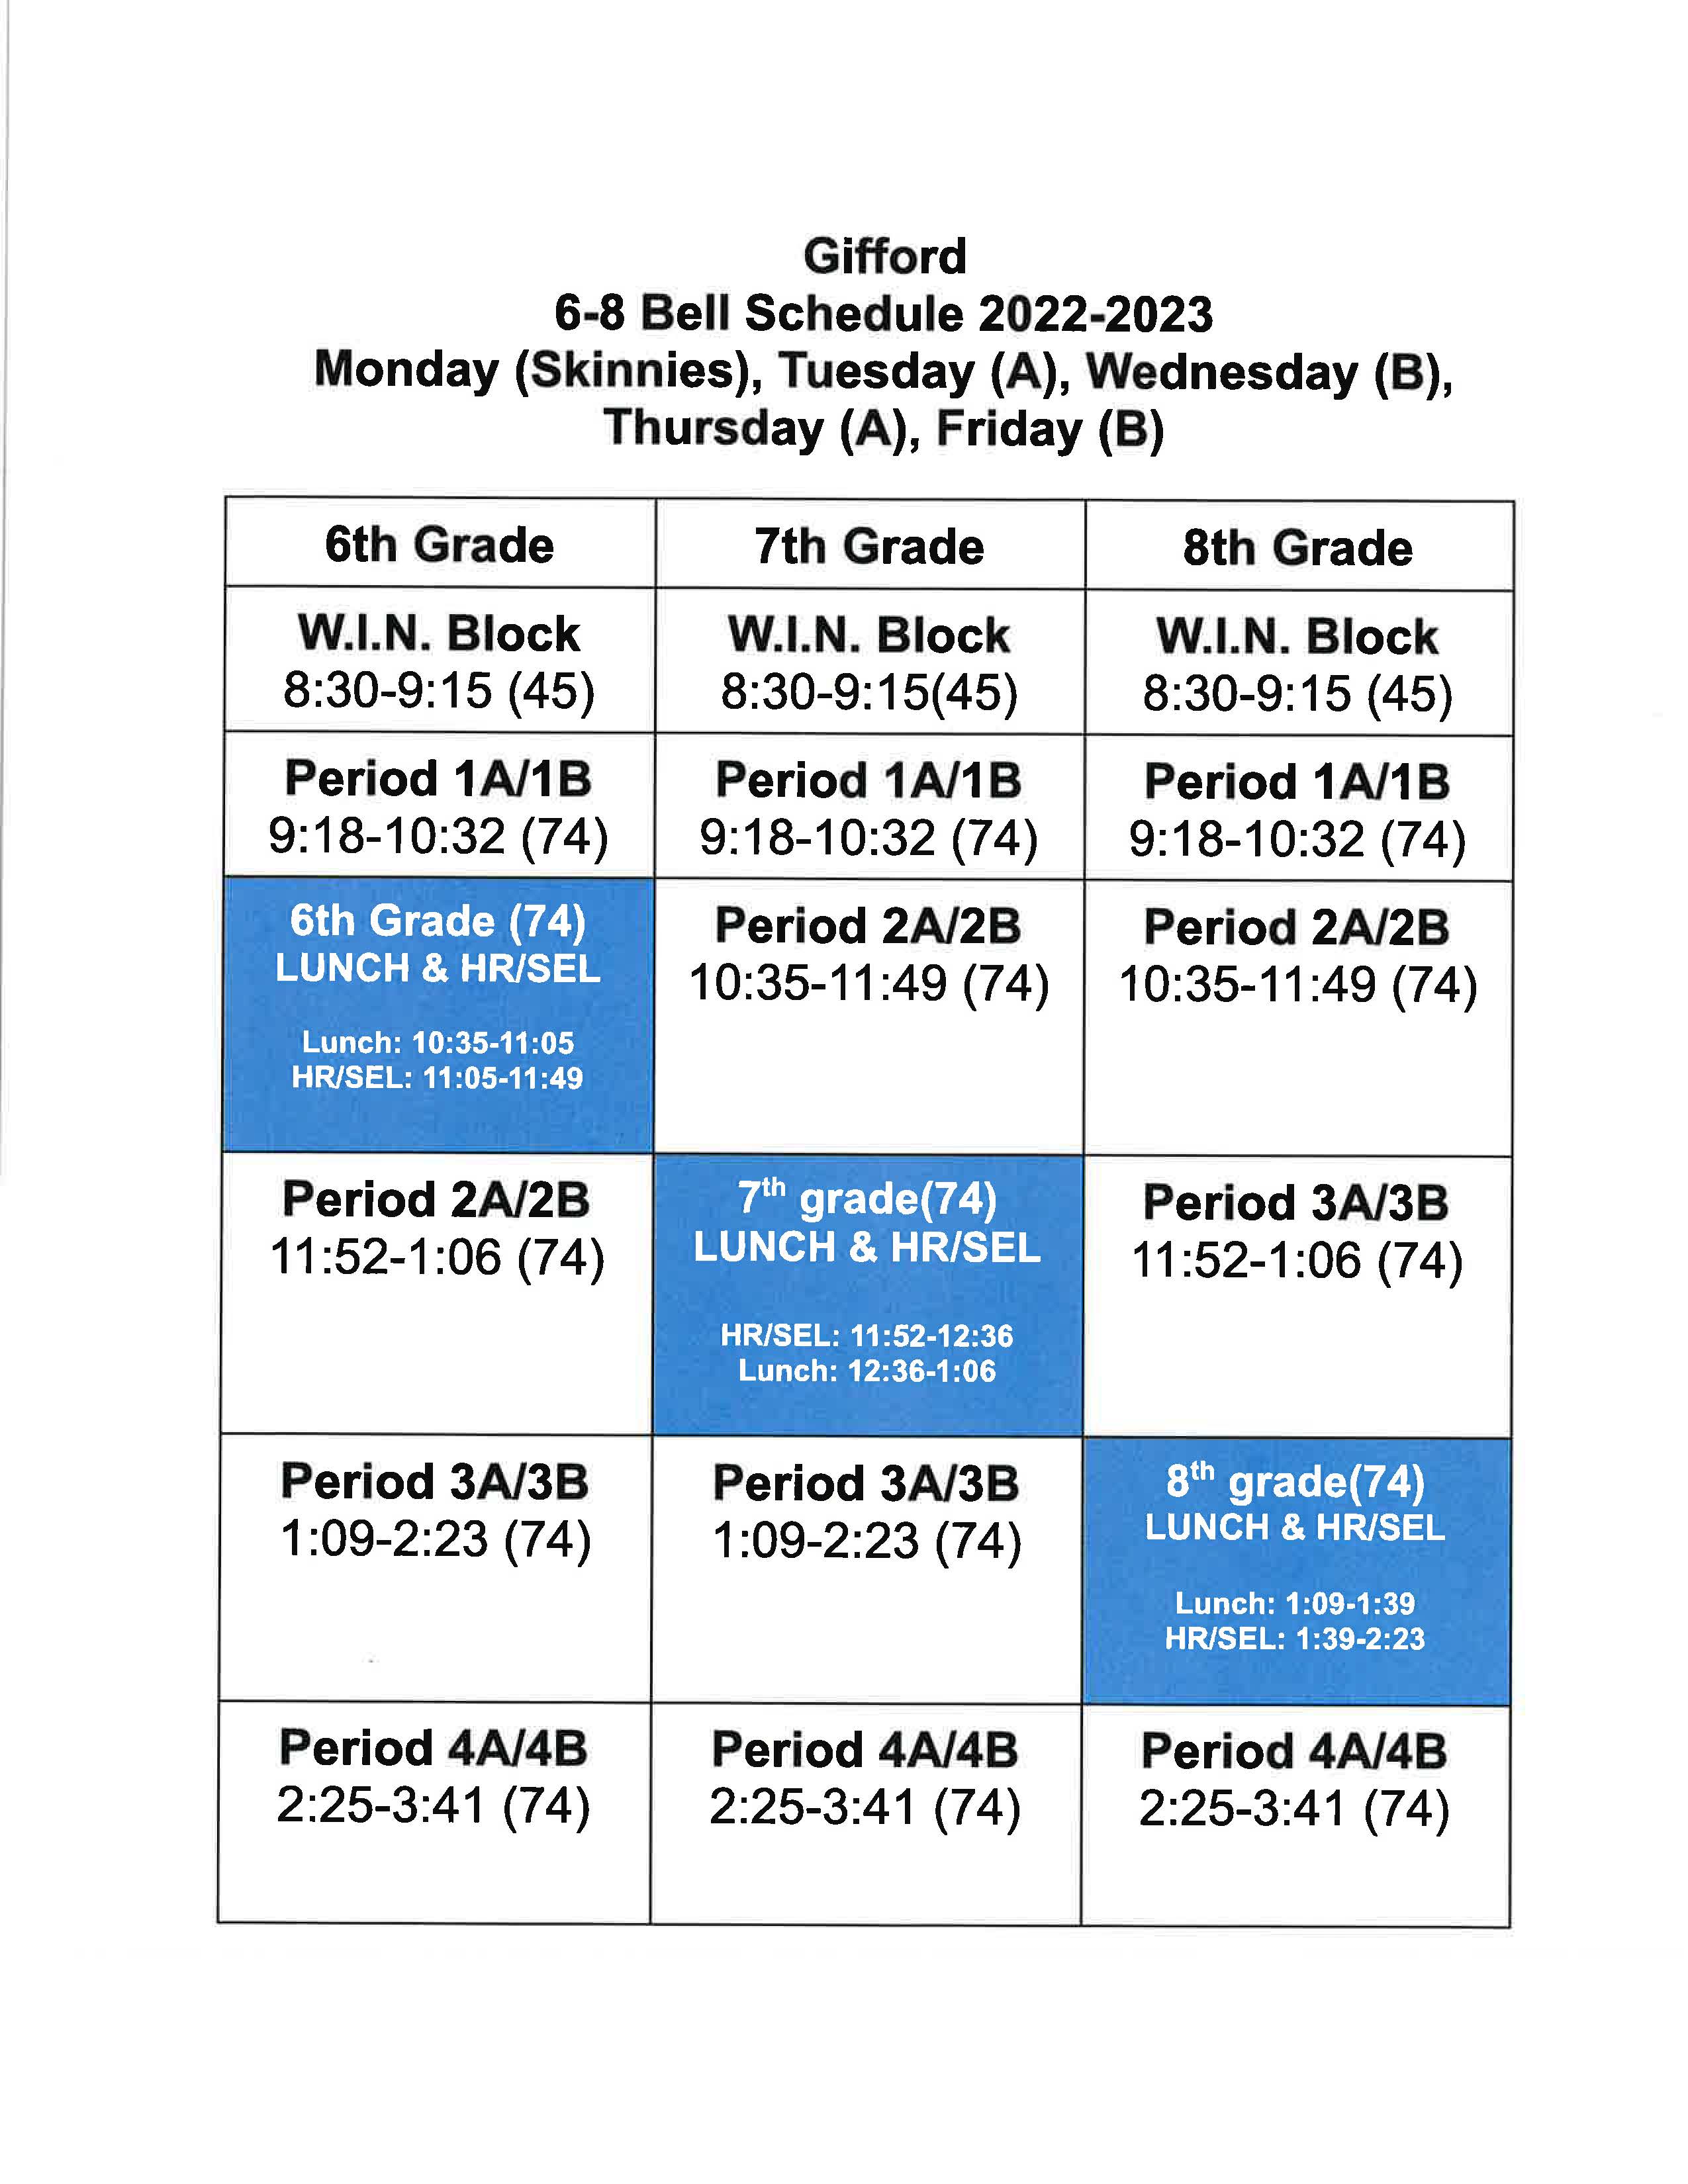 New Schedule For Middle School Students Beginning 9/12/22 | RUSD